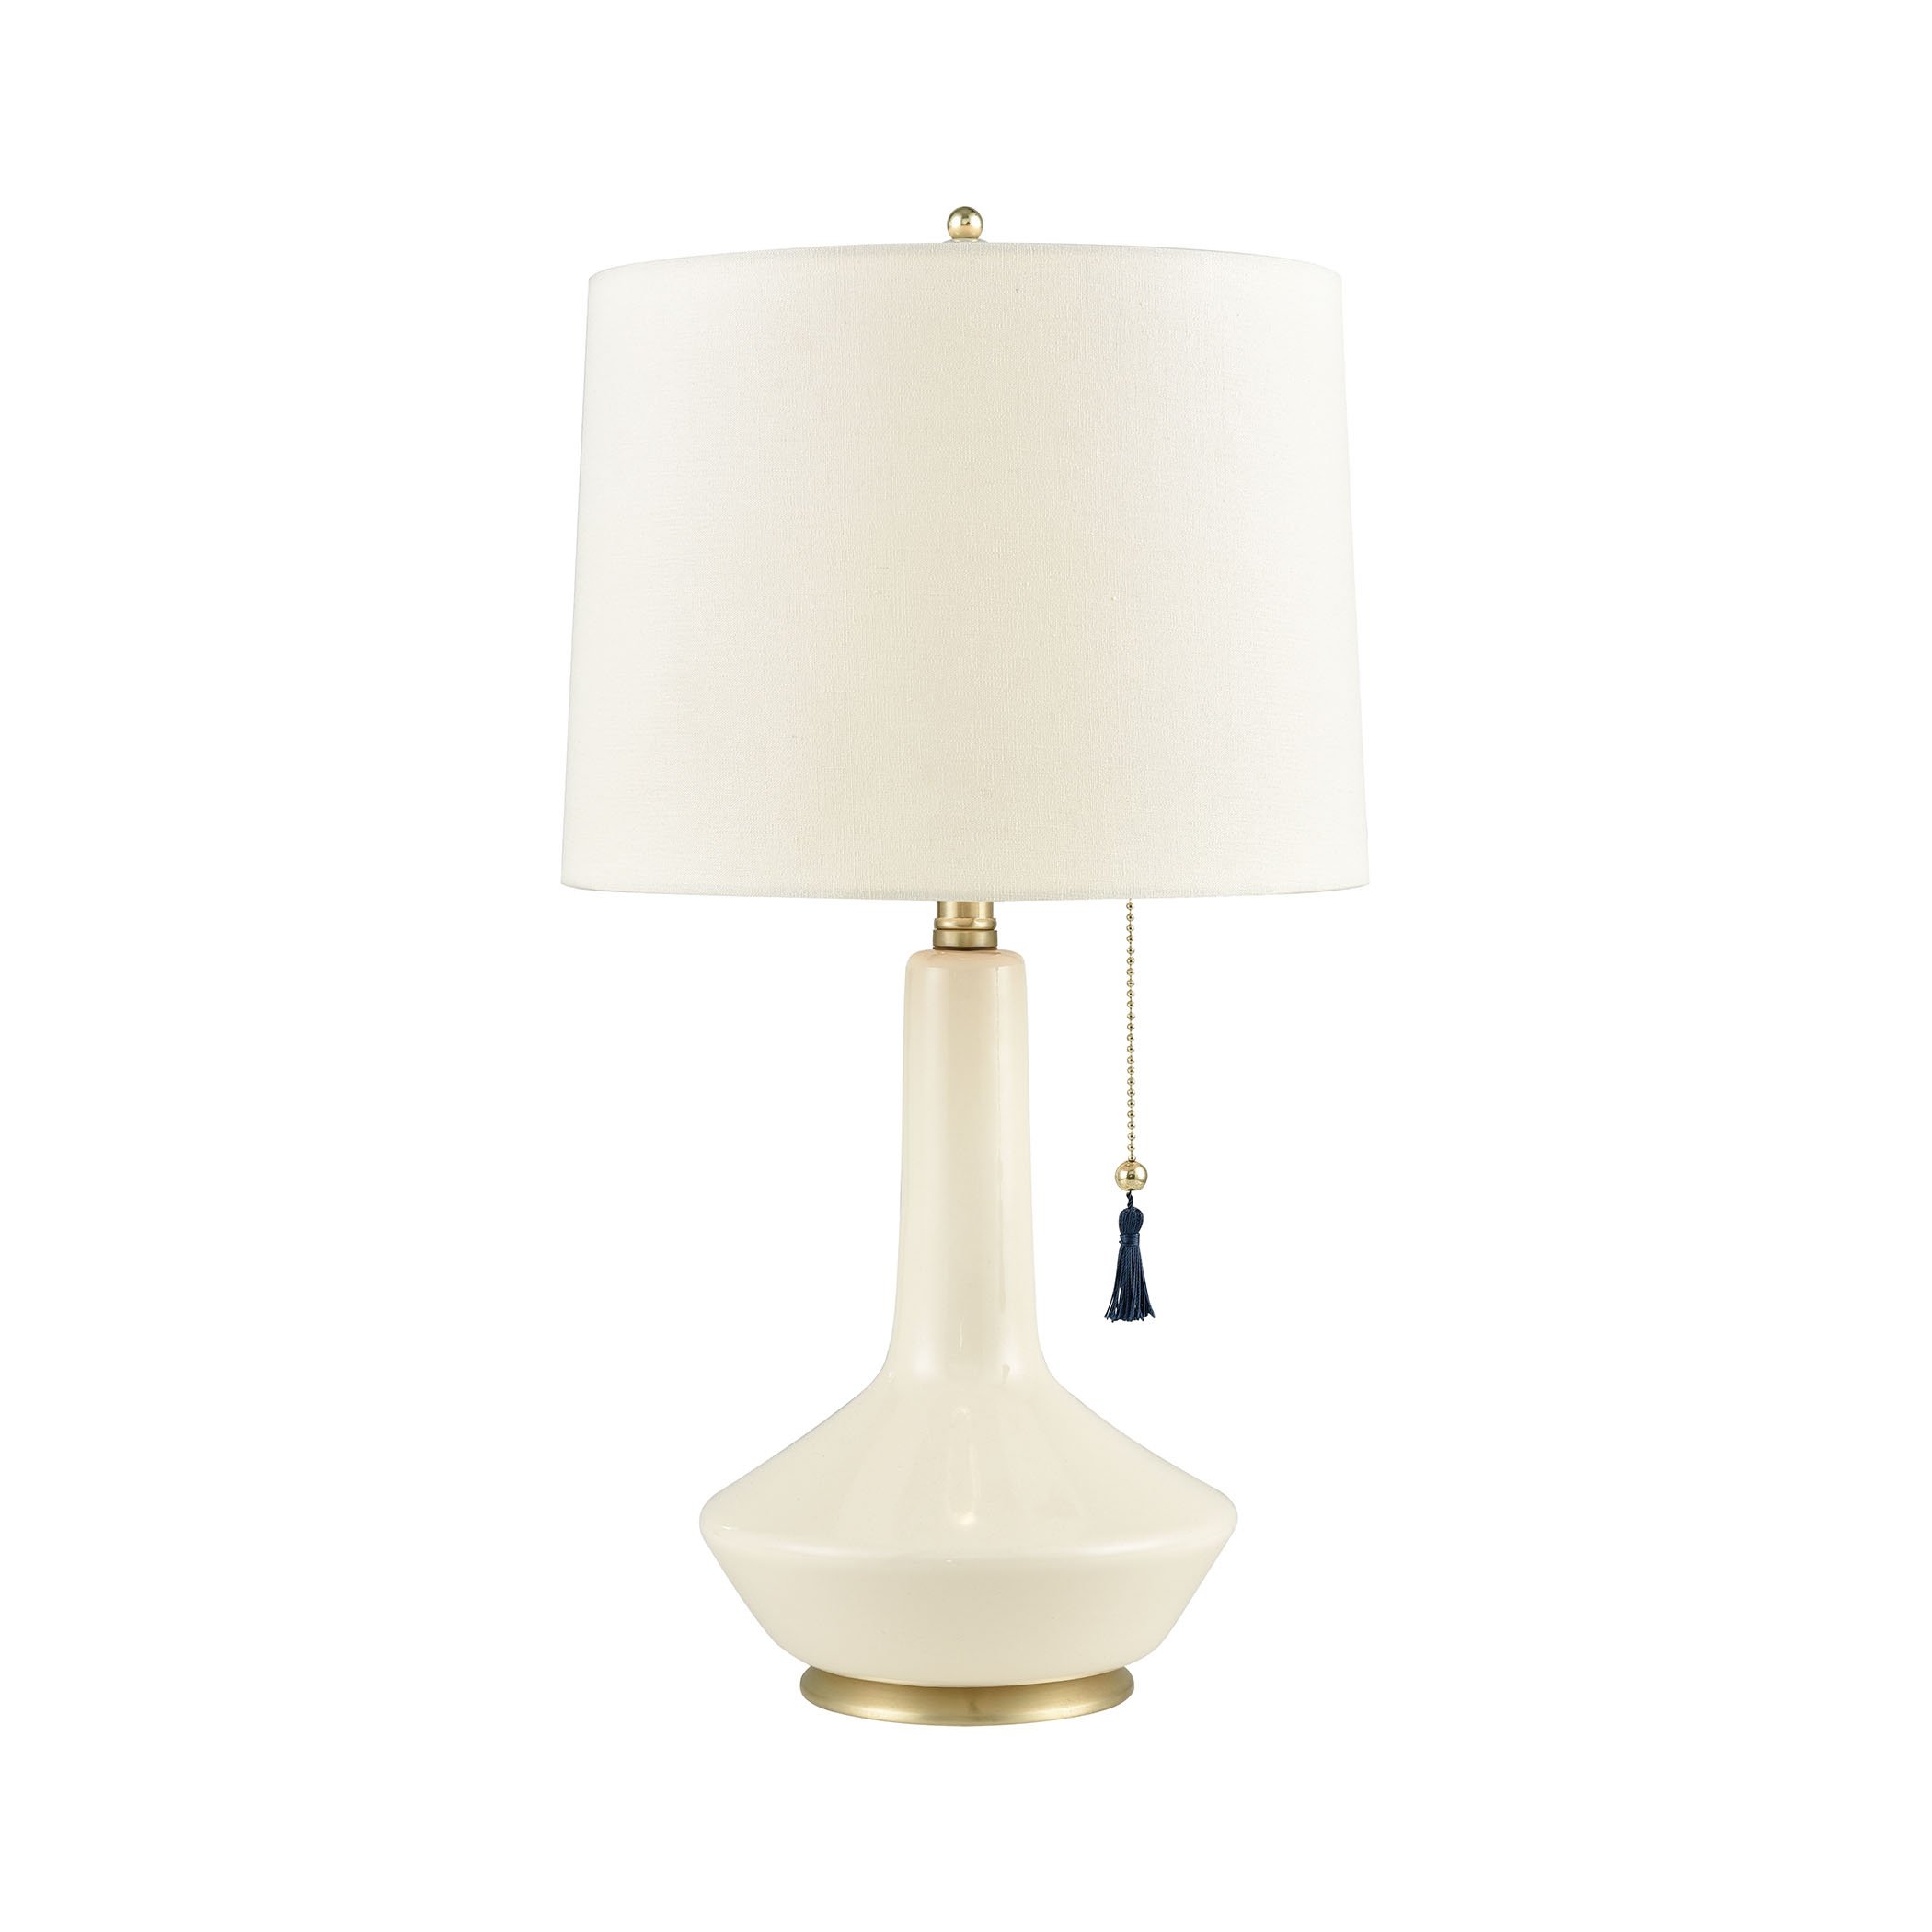 CURIEUX TABLE LAMP - Image 0